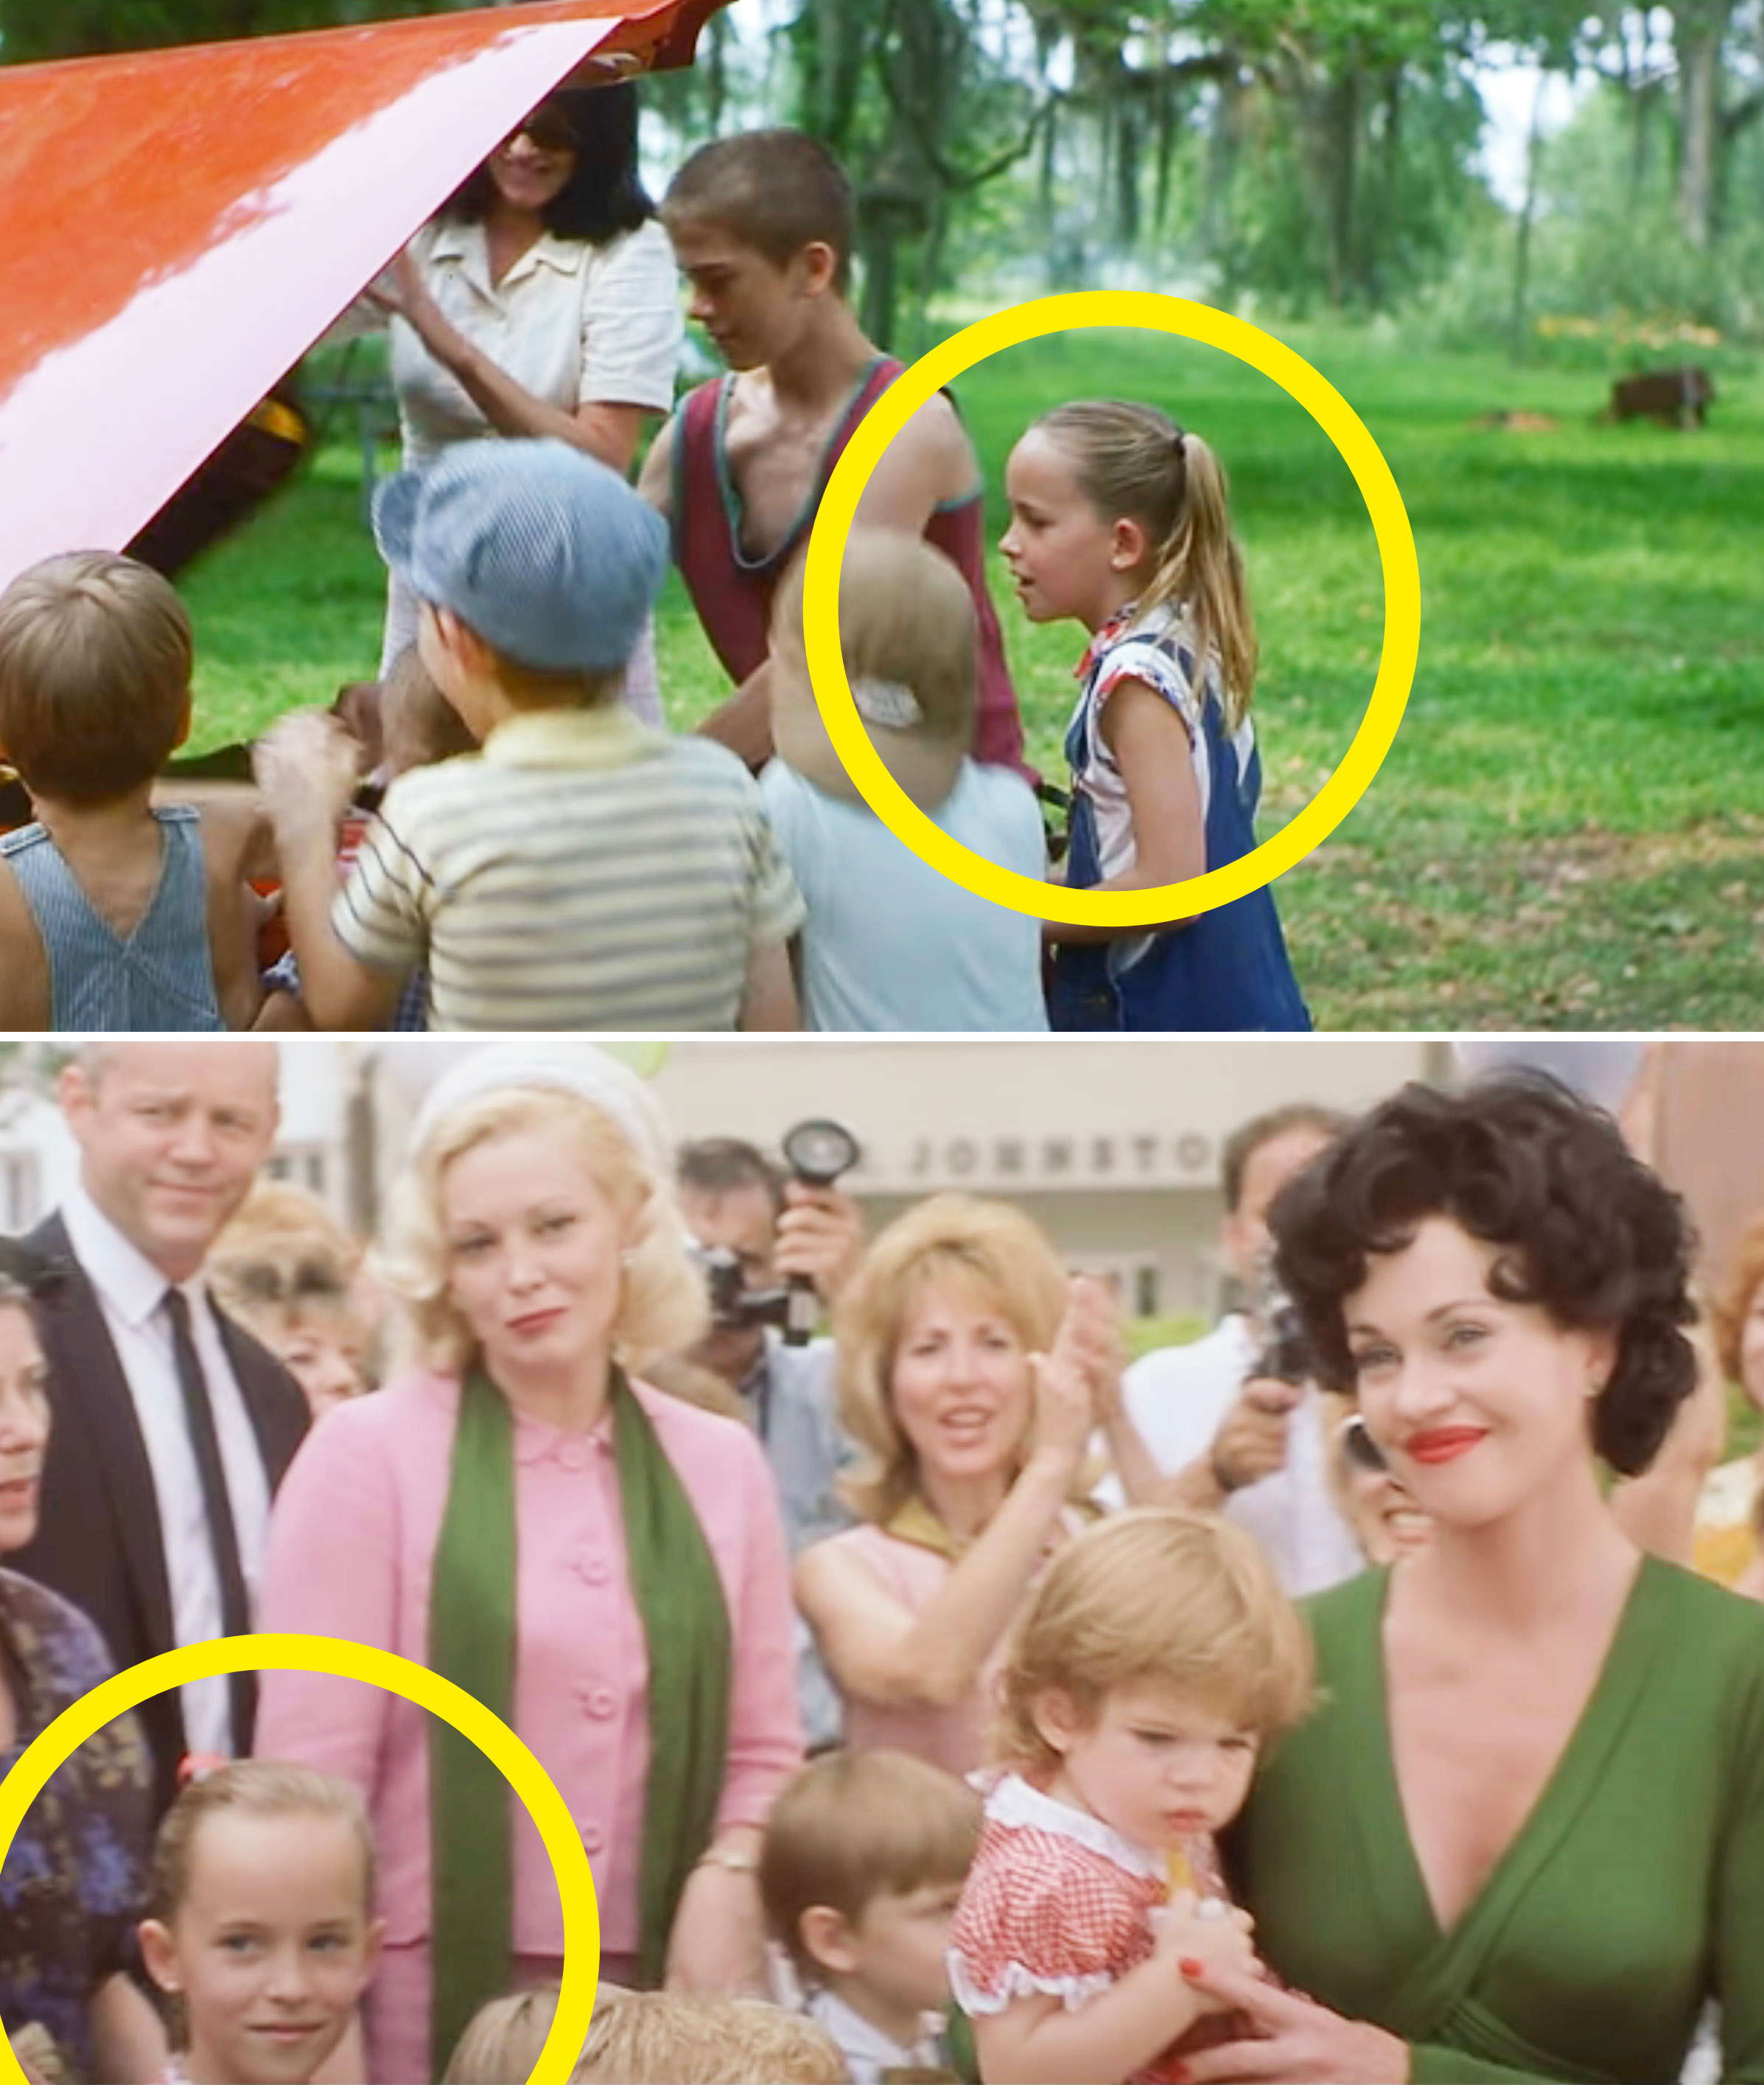 circle around her in the film playing with kids and standing in a crowd